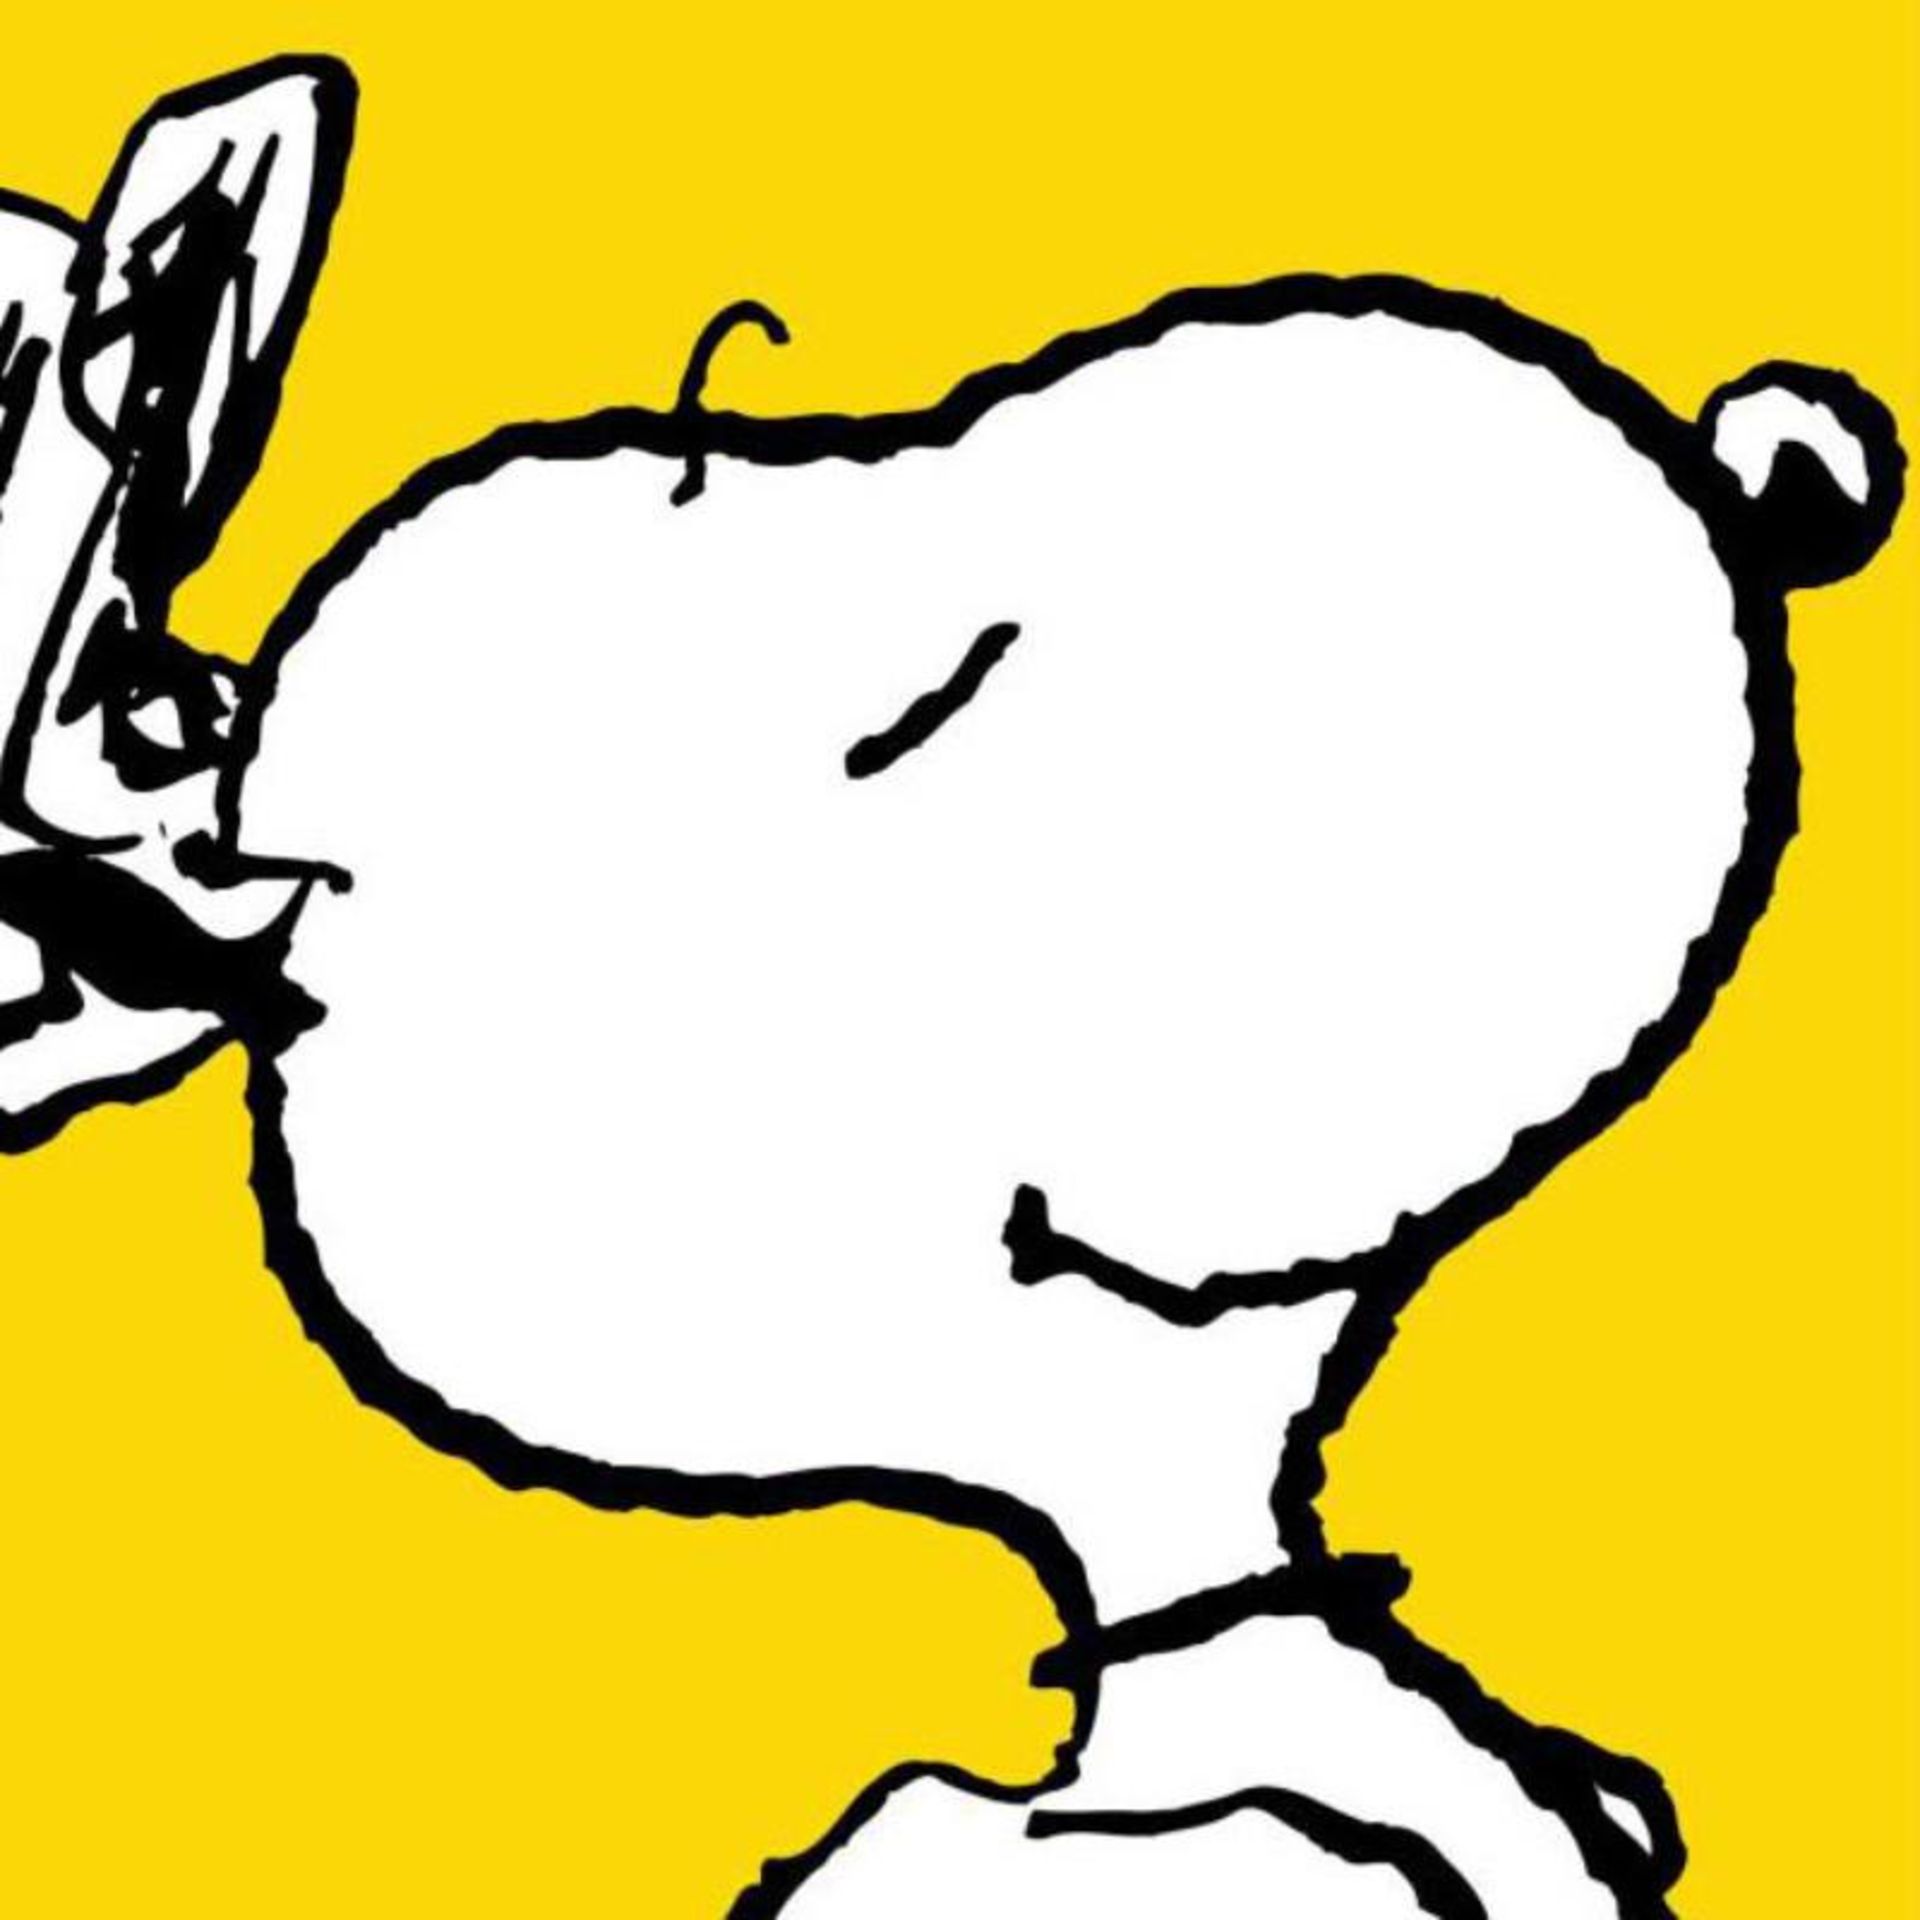 Snoopy: Yellow by Peanuts - Image 2 of 2